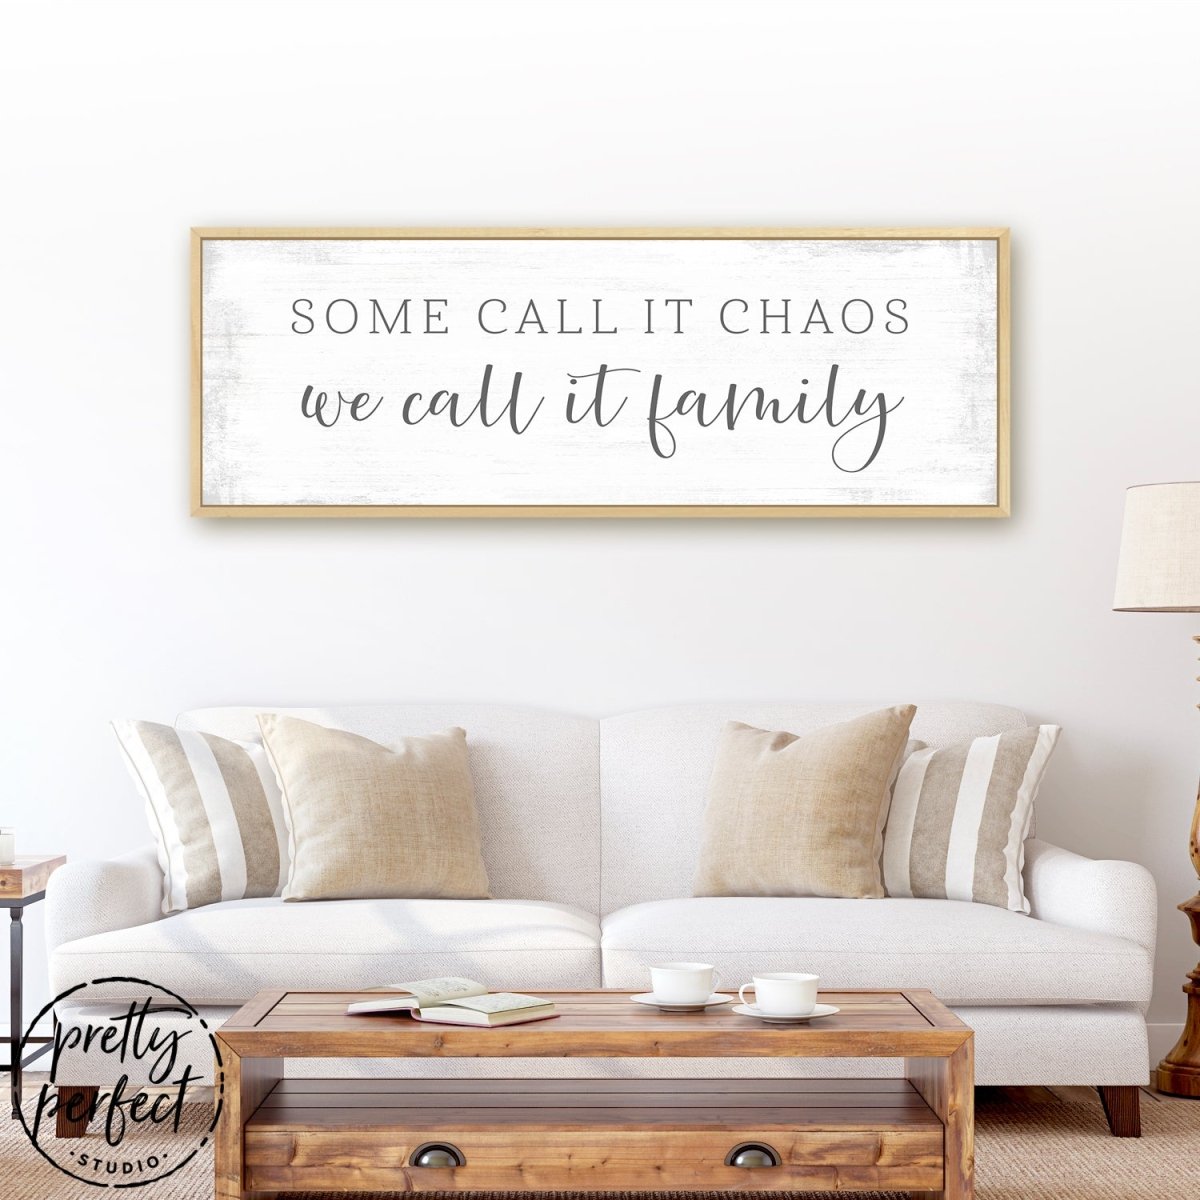 Some Call It Chaos We Call It Family Sign Above Couch - Pretty Perfect Studio